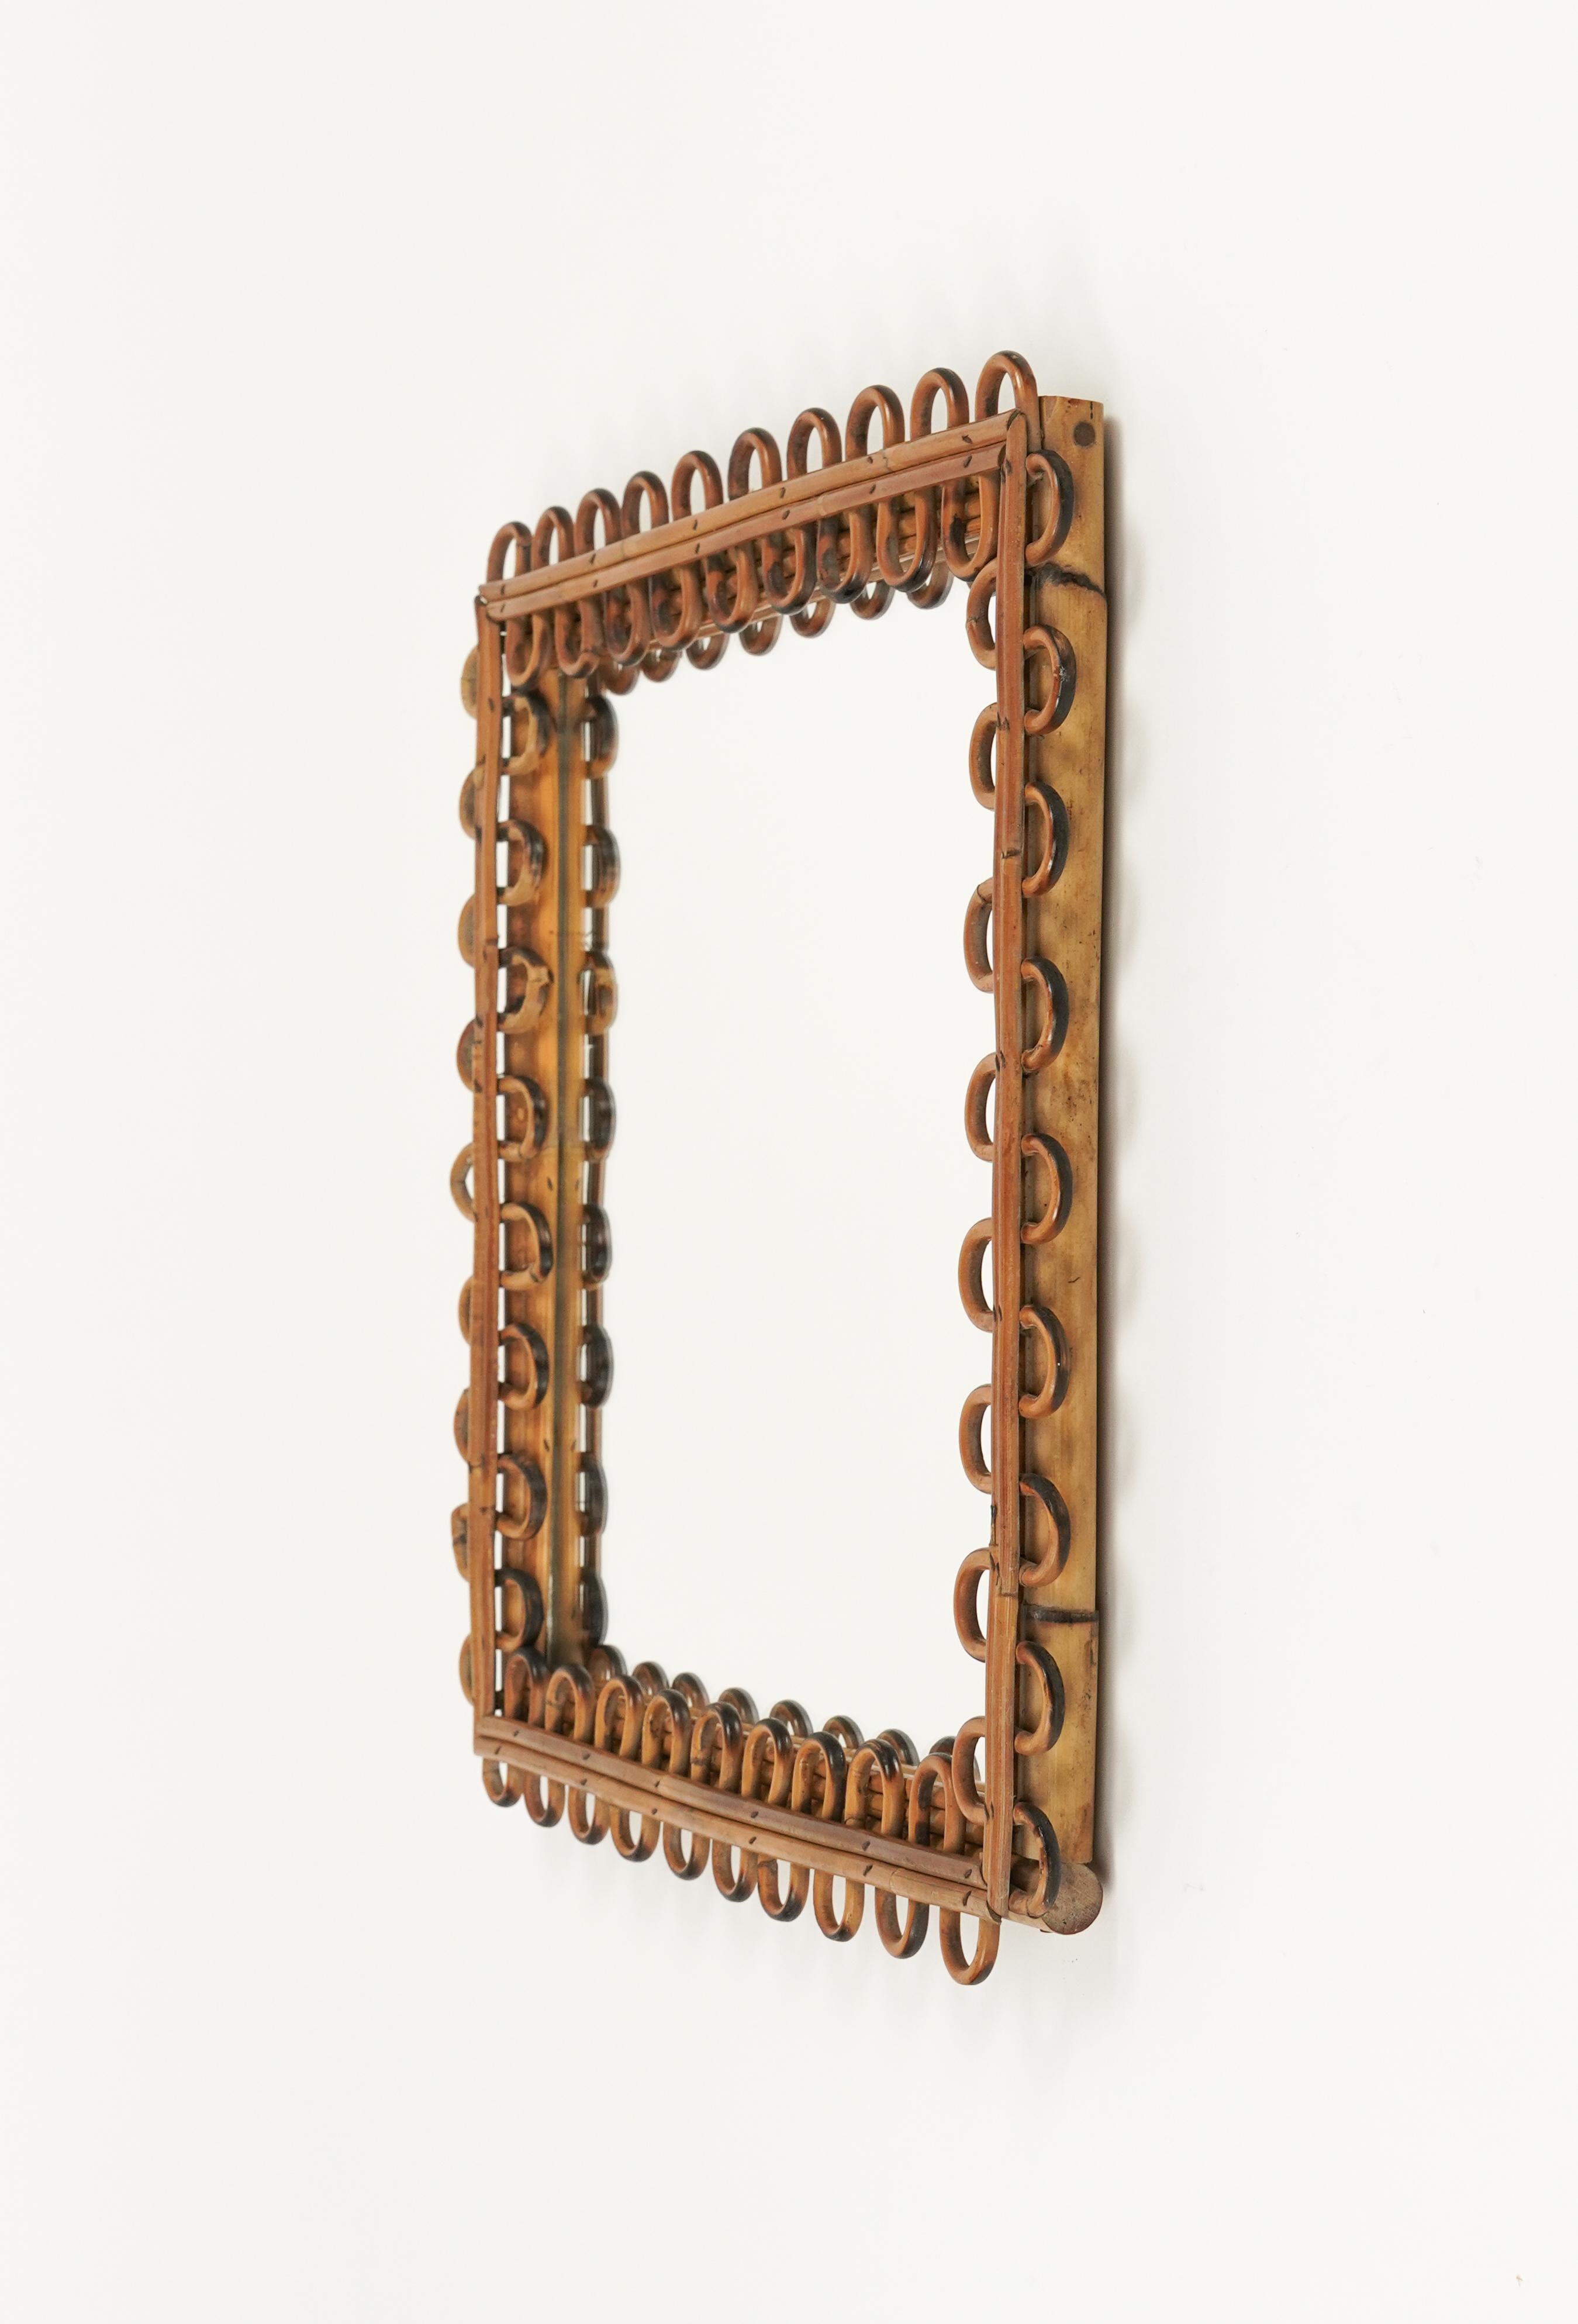 Midcentury Rattan & Bamboo Squared Wall Mirror Franco Albini Style, Italy 1960s For Sale 2